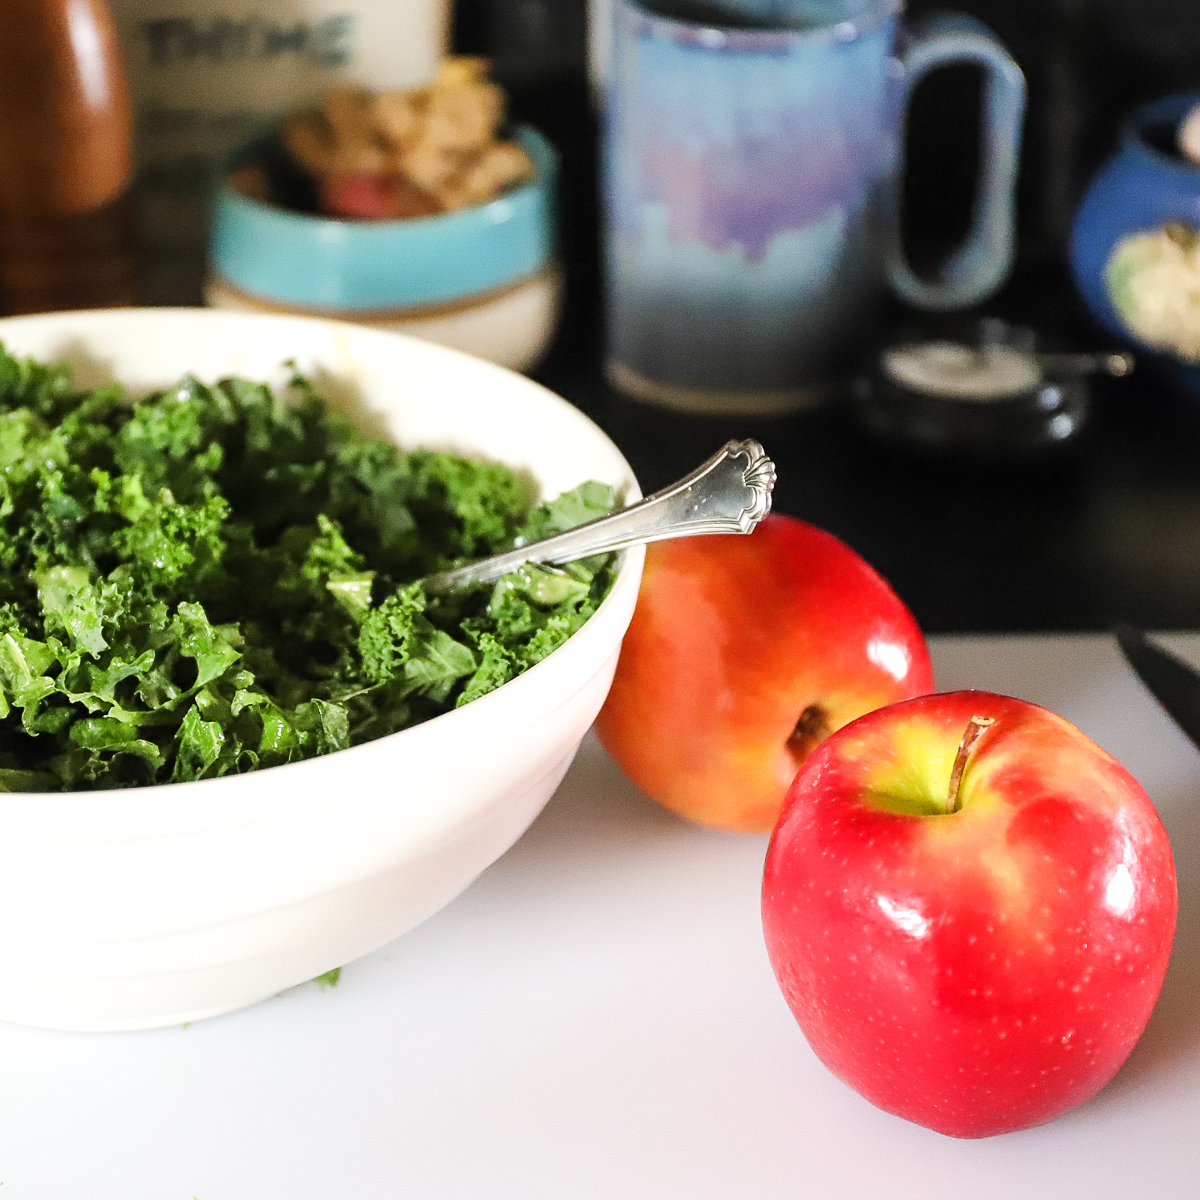 The chopped kale is in a large white bowl. Two whole red apples are sitting beside the bowl..